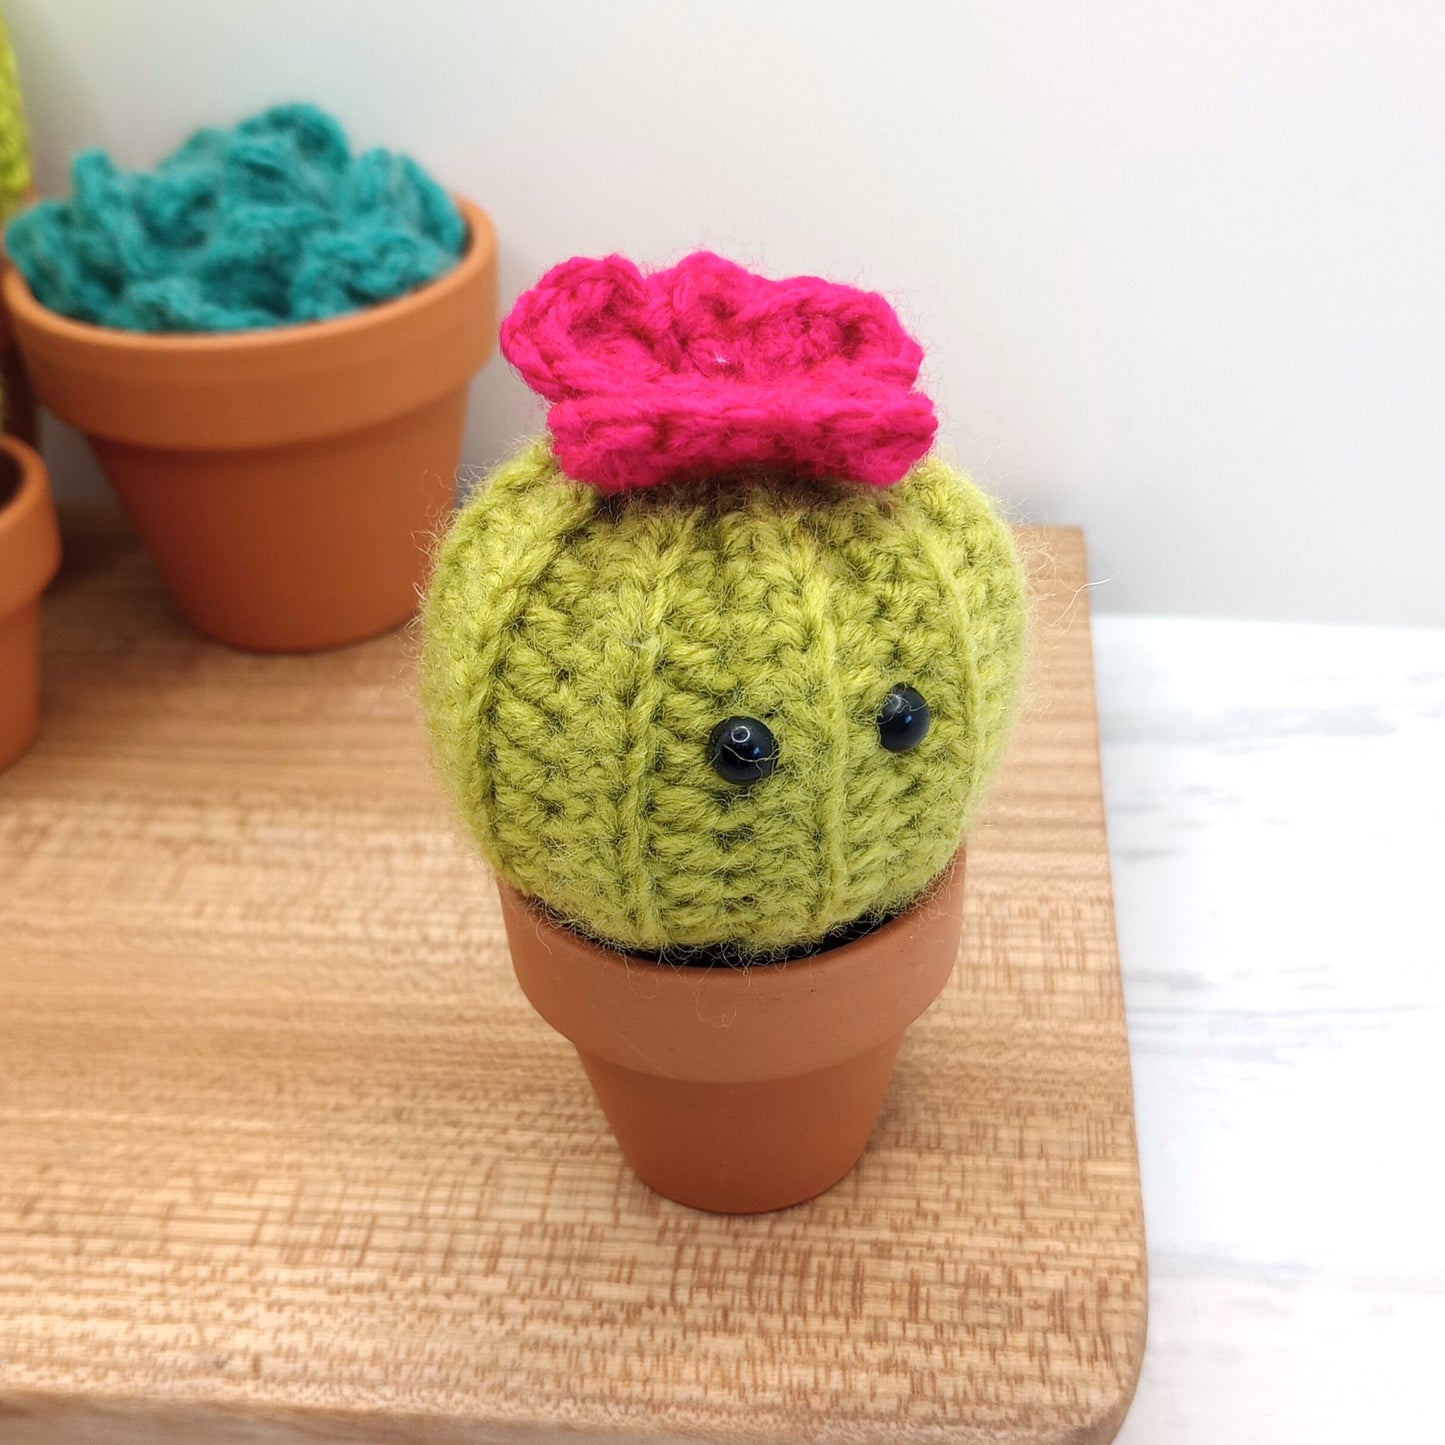 Mini Barrel Cactus with Eyes and flower